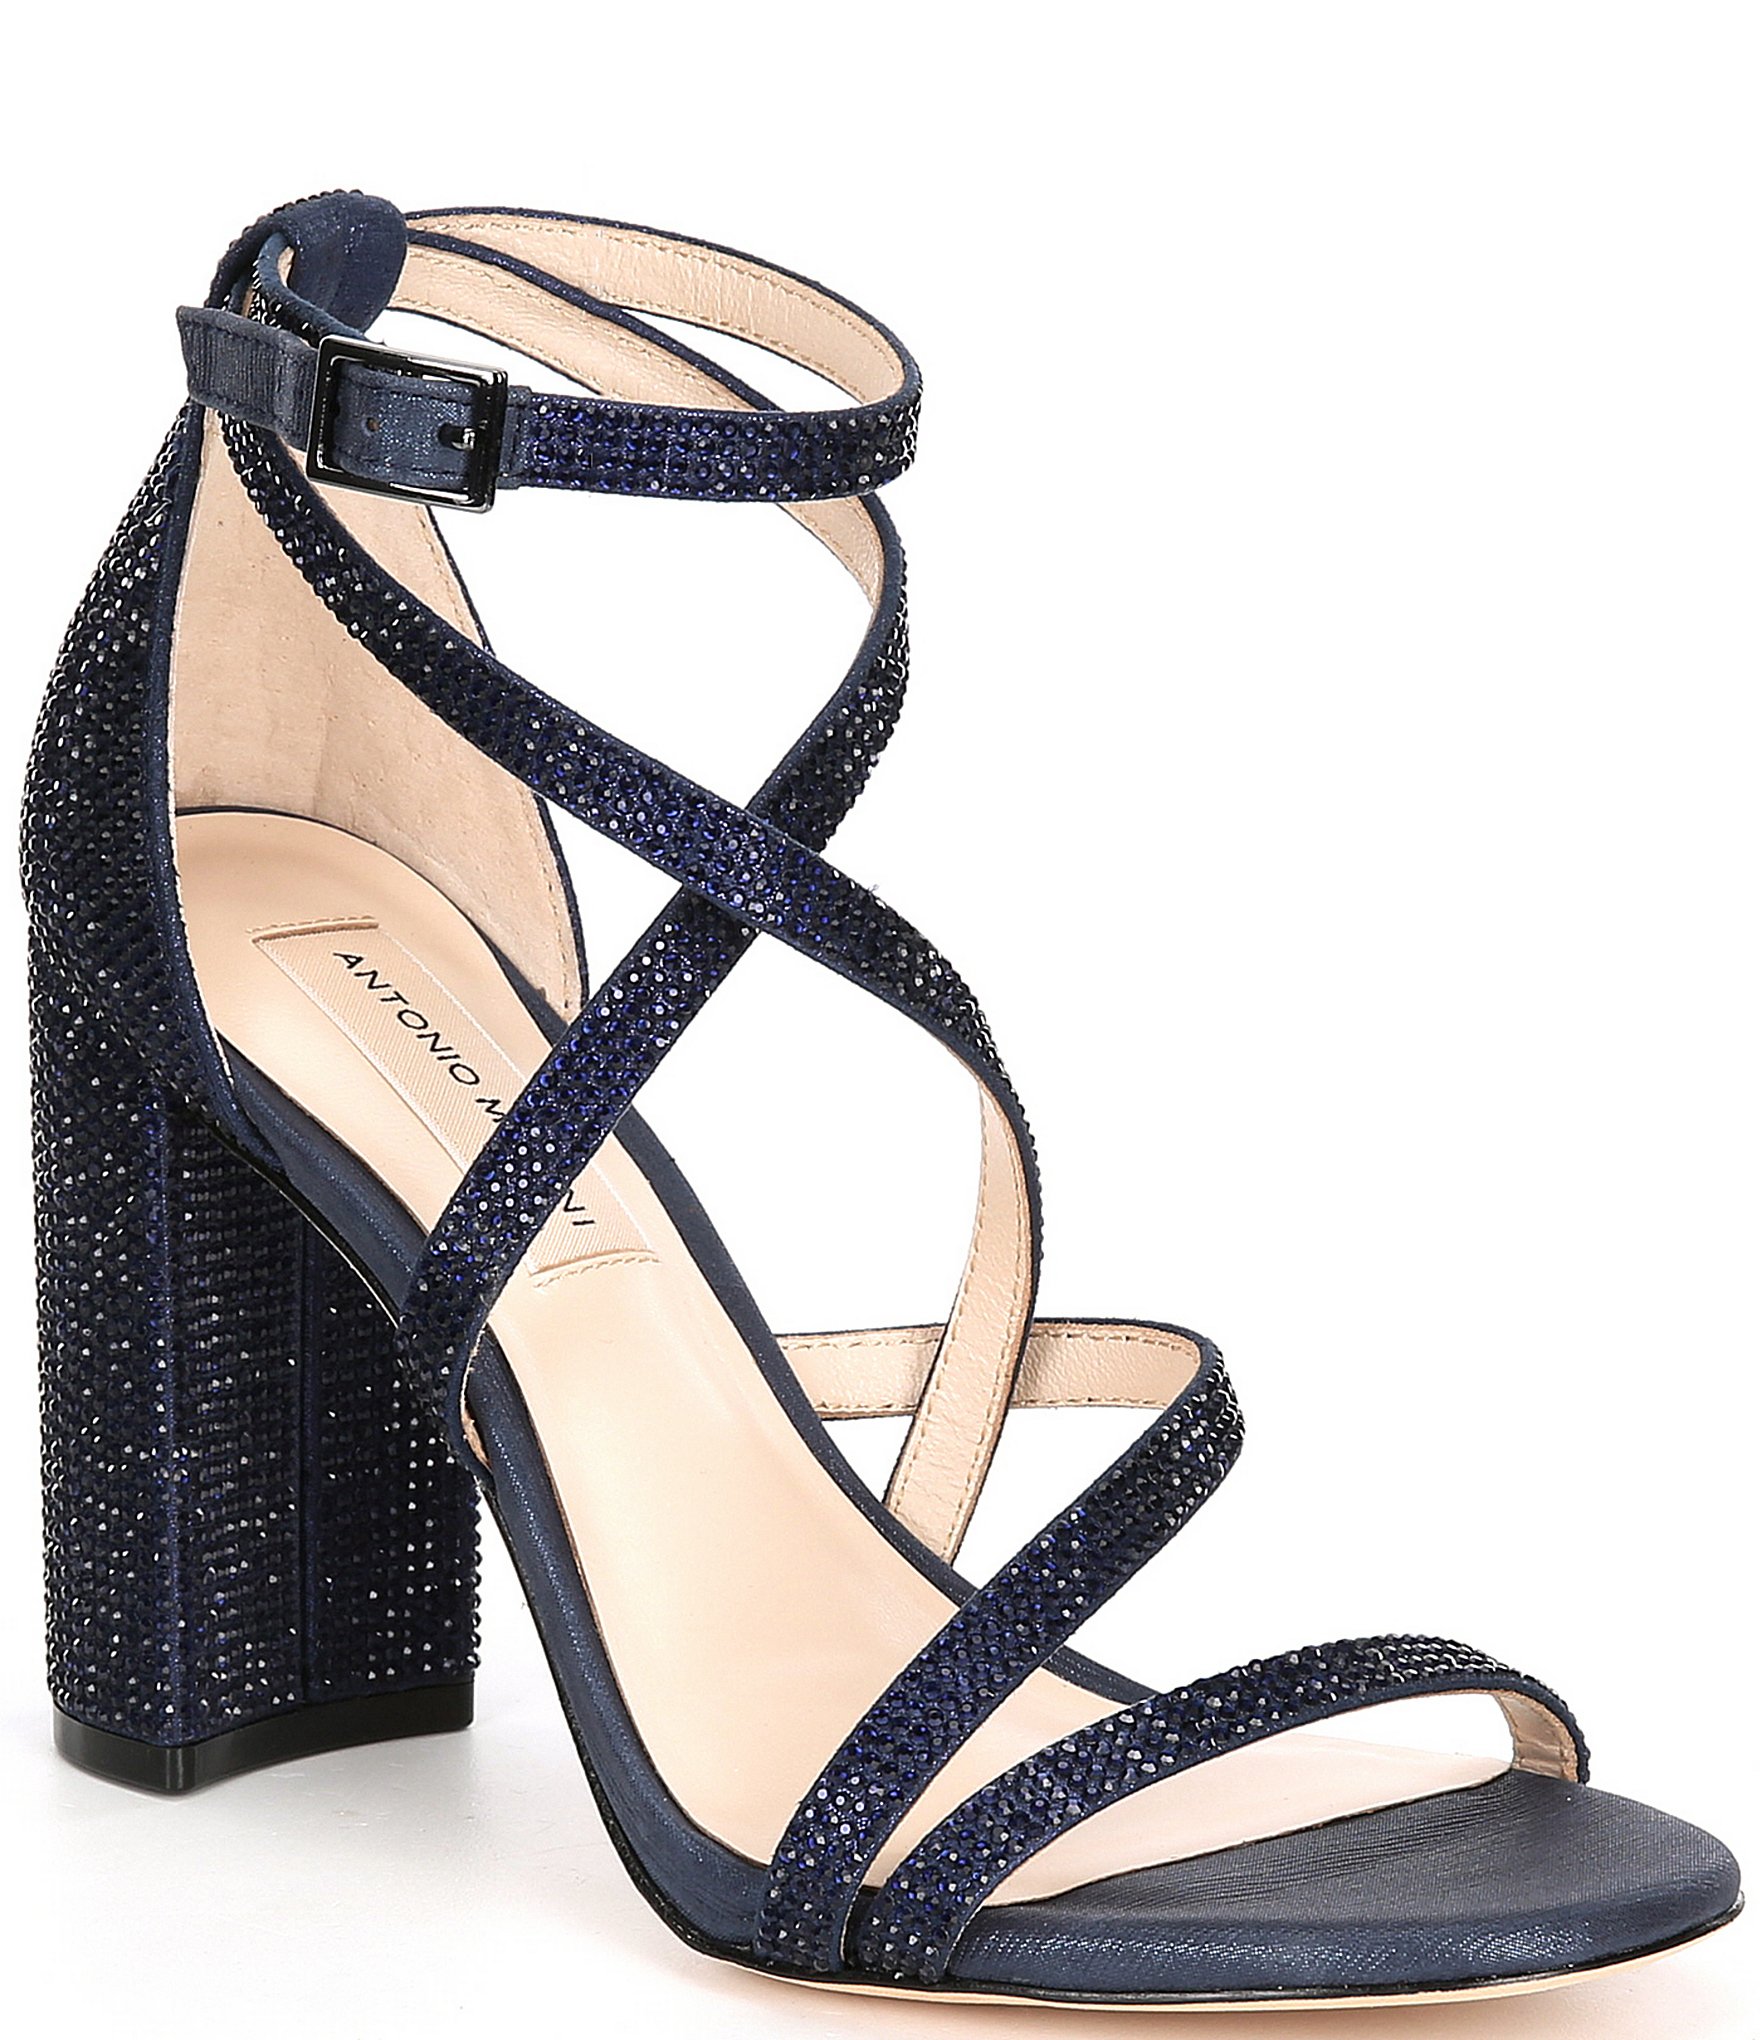 Navy Glitter Shoes Bow Slingback Cone Heel Sandals | Heels, Shoes women  heels, Glitter shoes